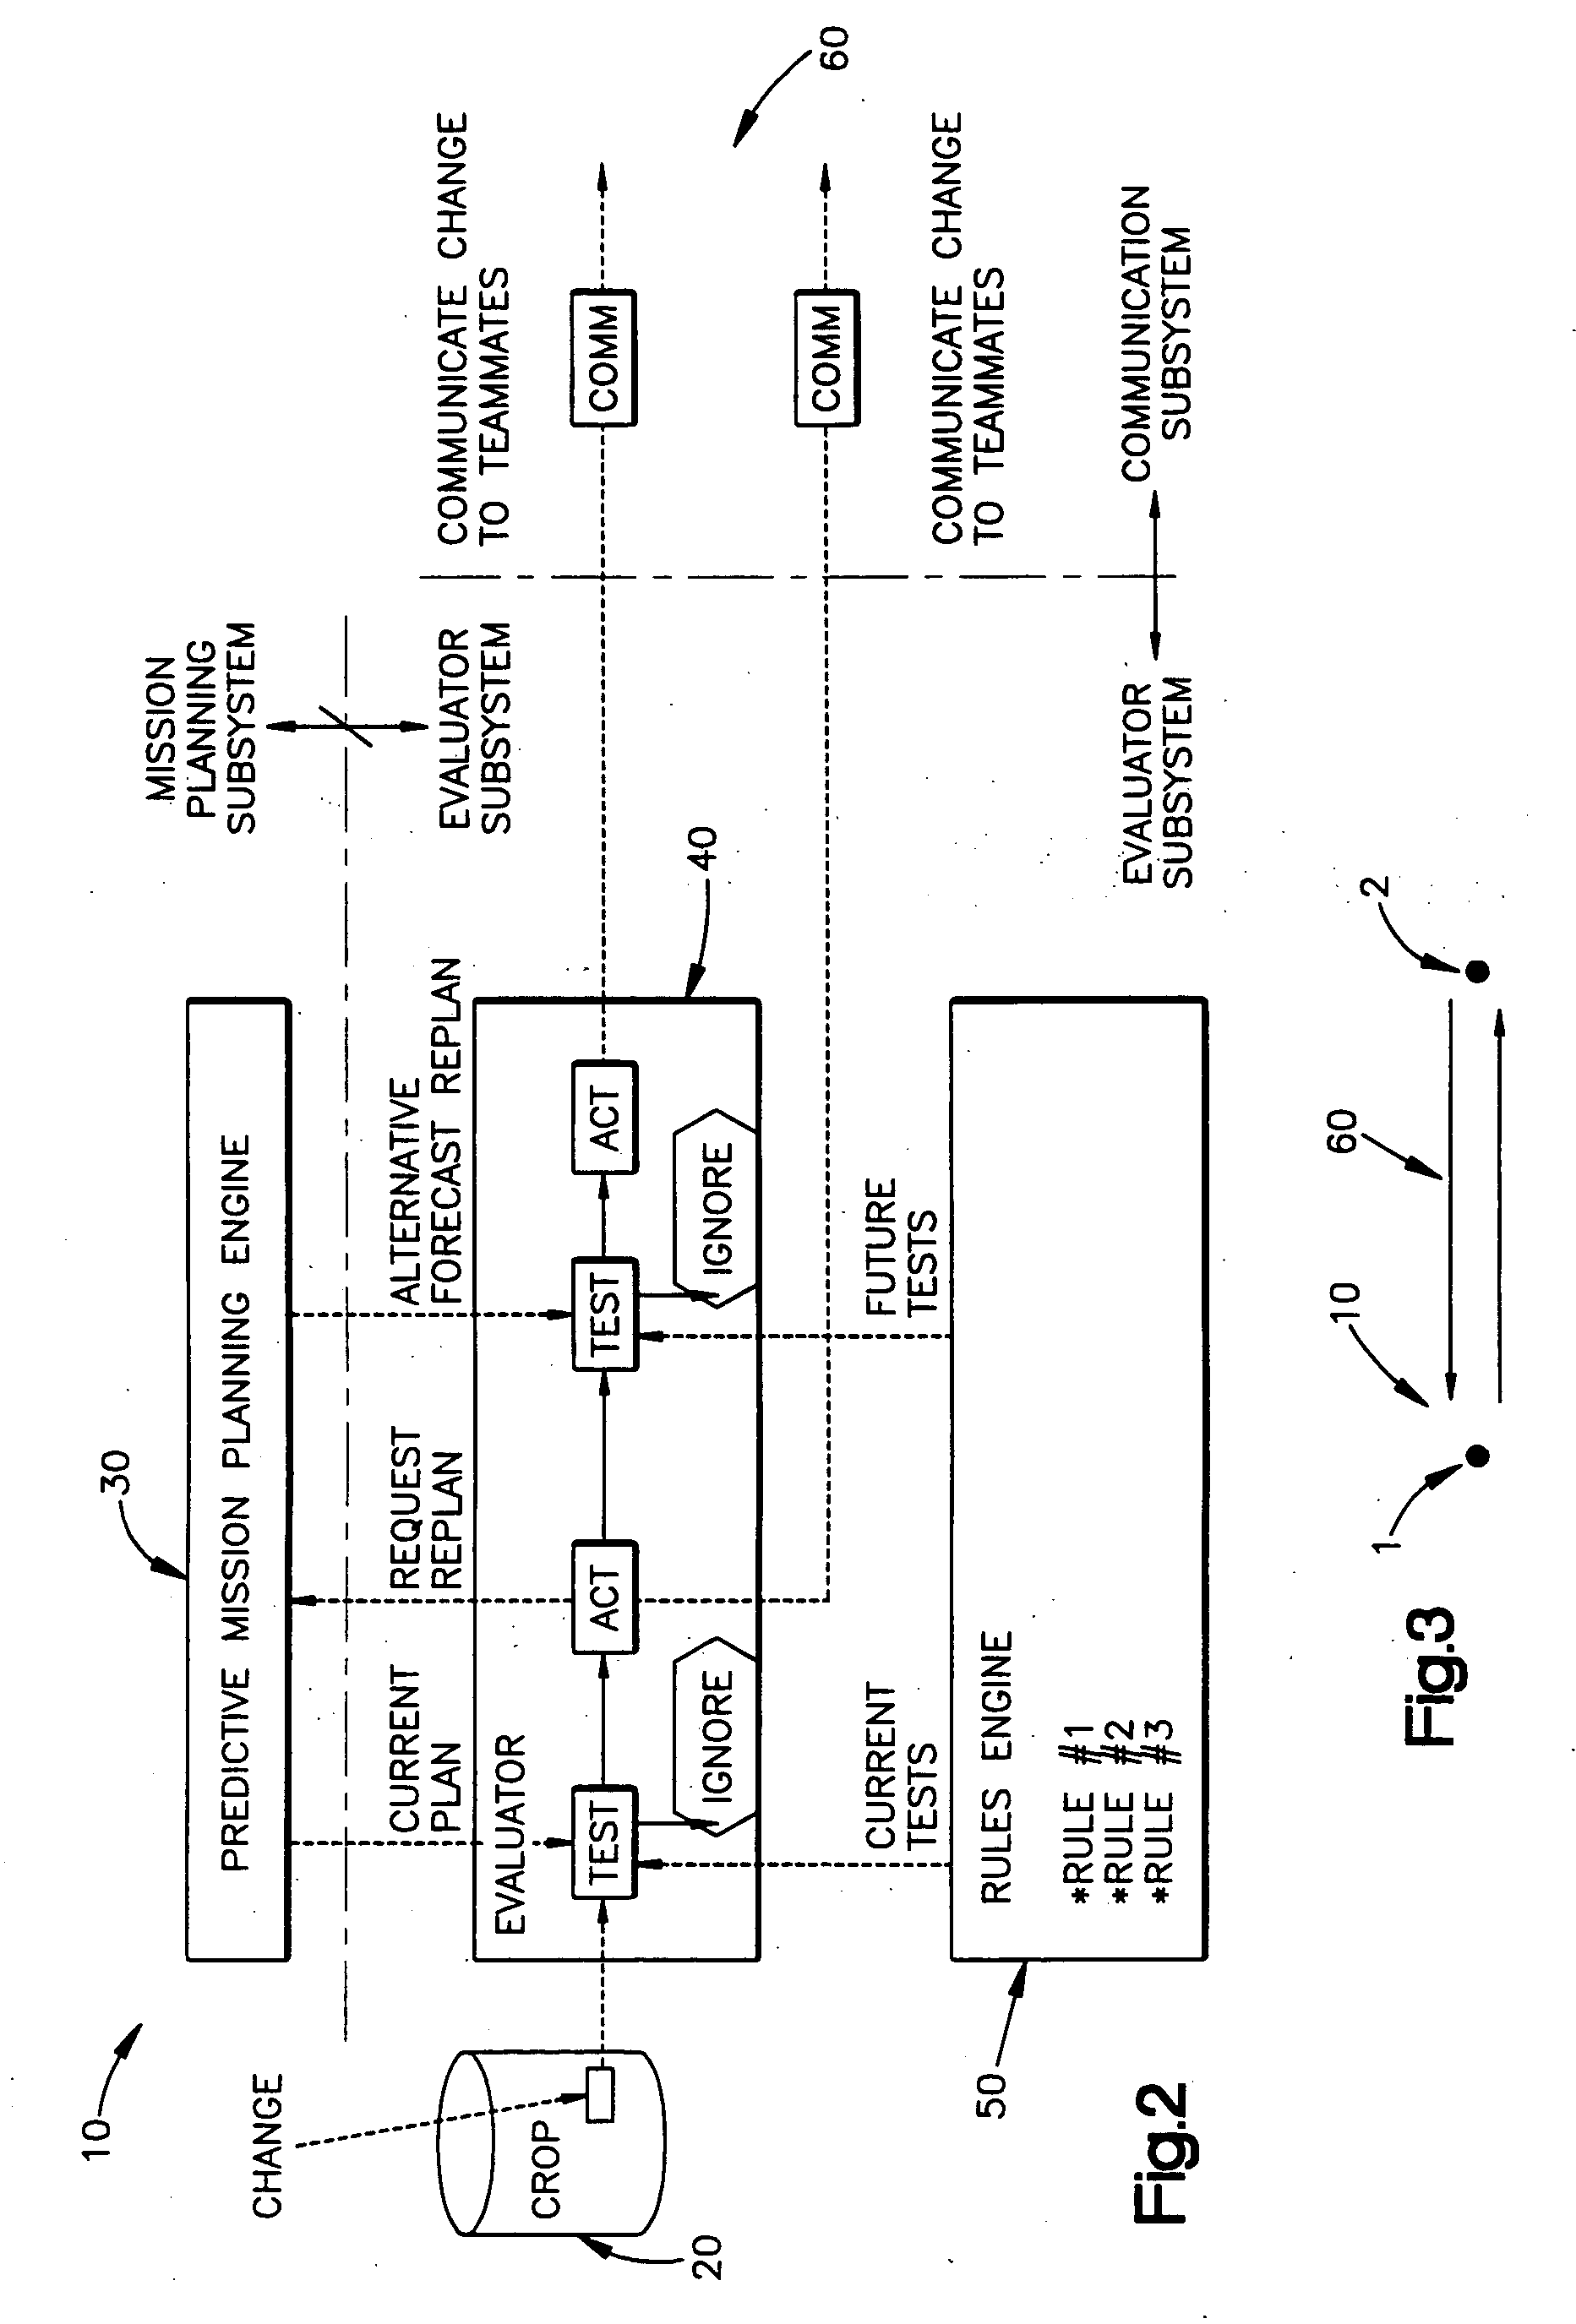 System for predictively managing communication attributes of unmanned vehicles